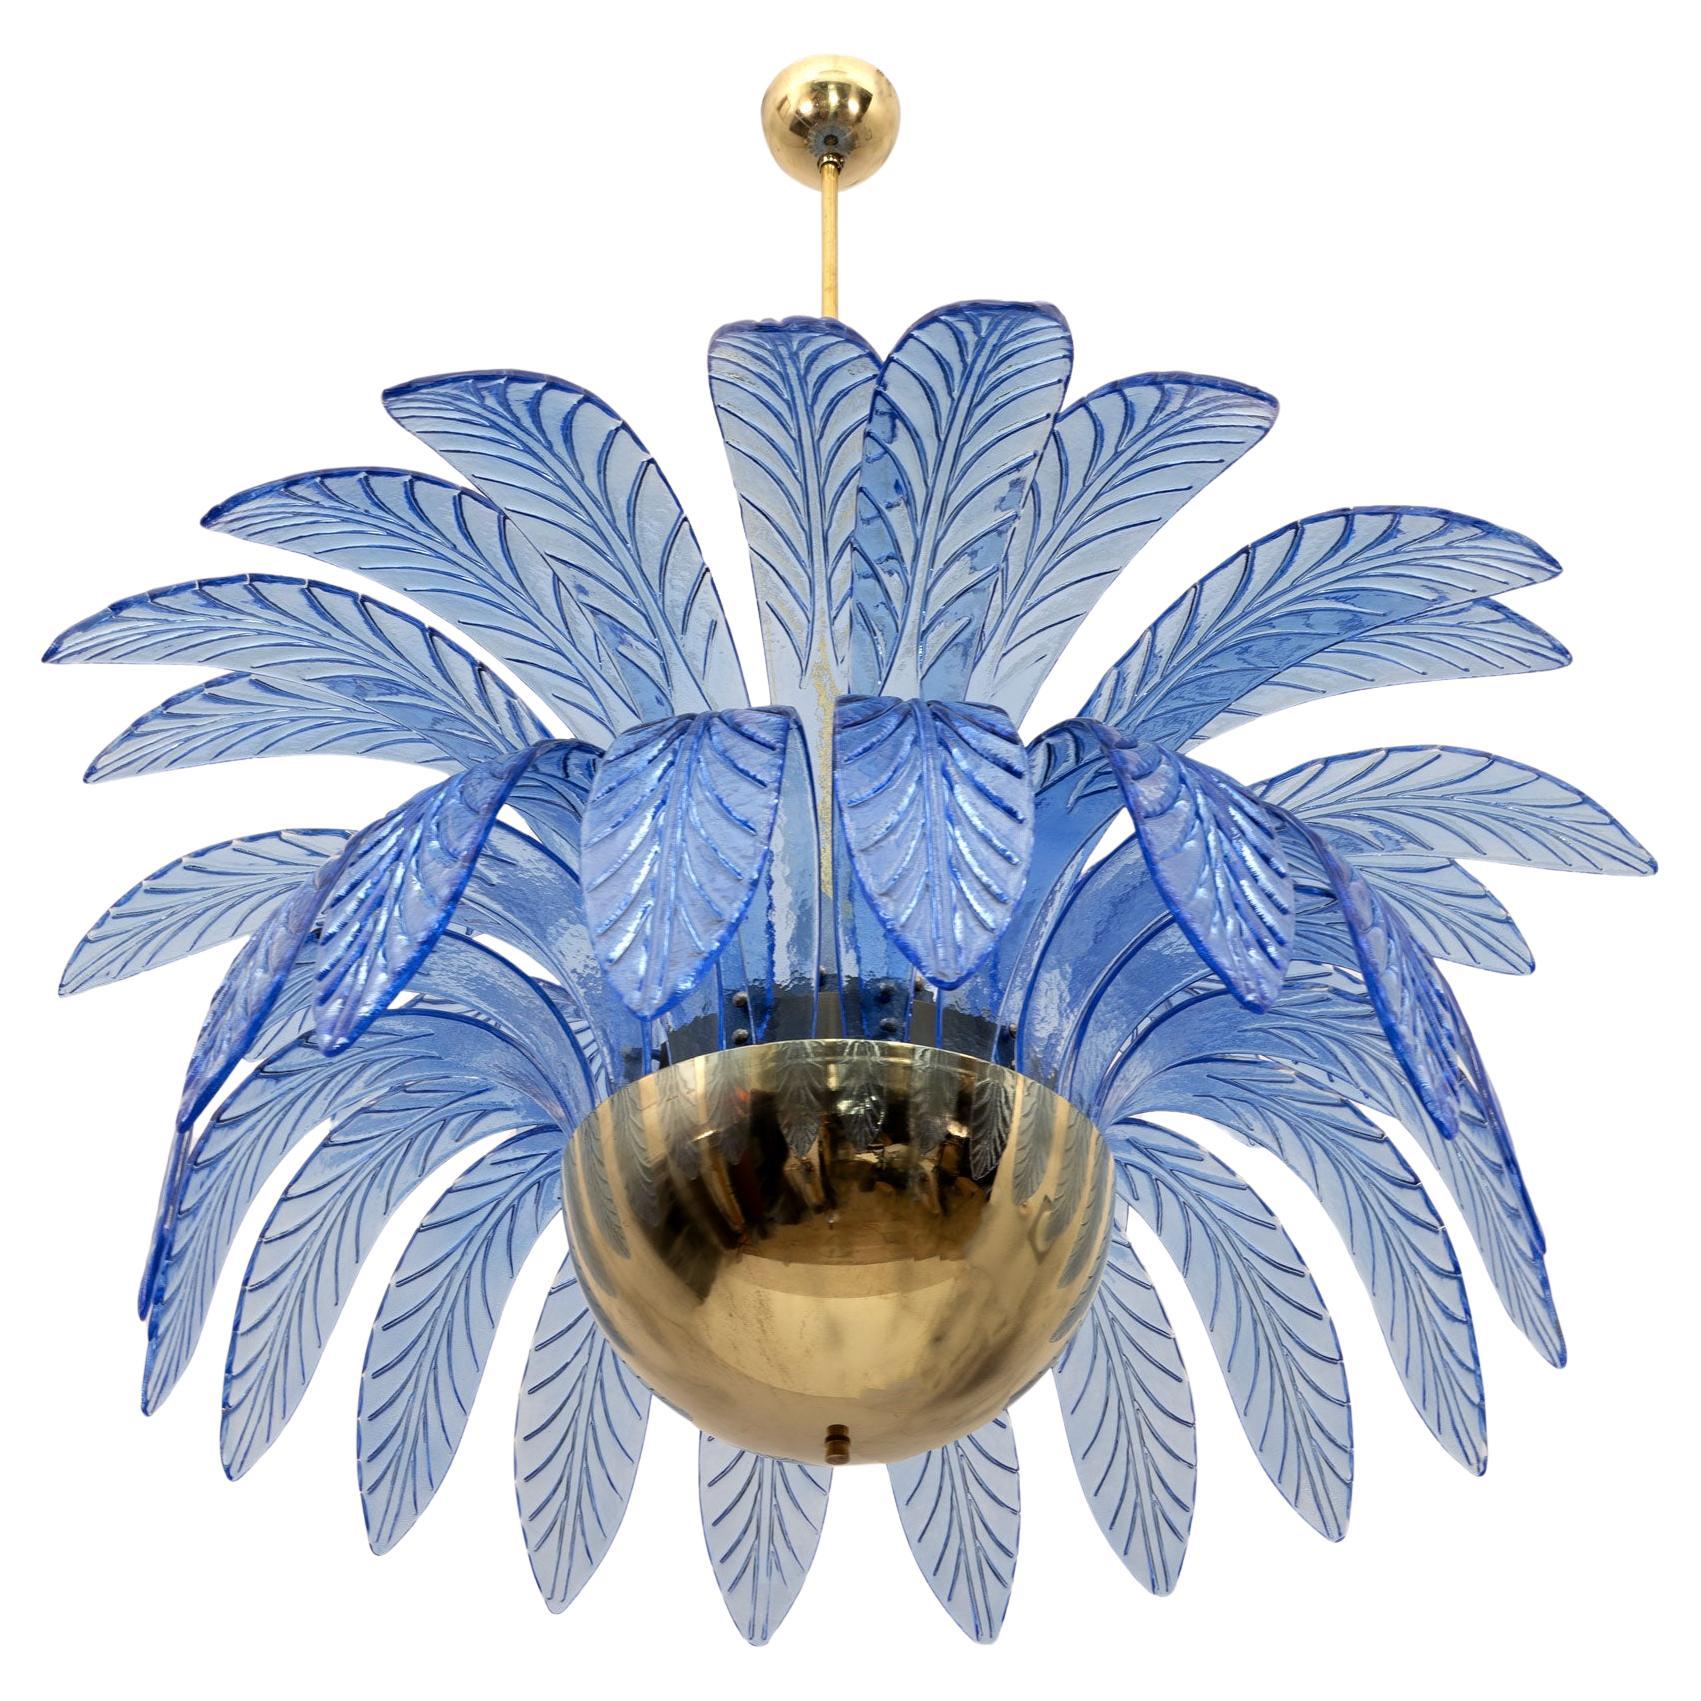 Large mouth-blown Murano glass chandelier, 38 light blue Murano glass leaves, brass structure, 12 light bulbs. The chandelier reproduces the crown of a palm tree. We supply reducers for E12 USA bulbs.
The minimum height, if you want to shorten the